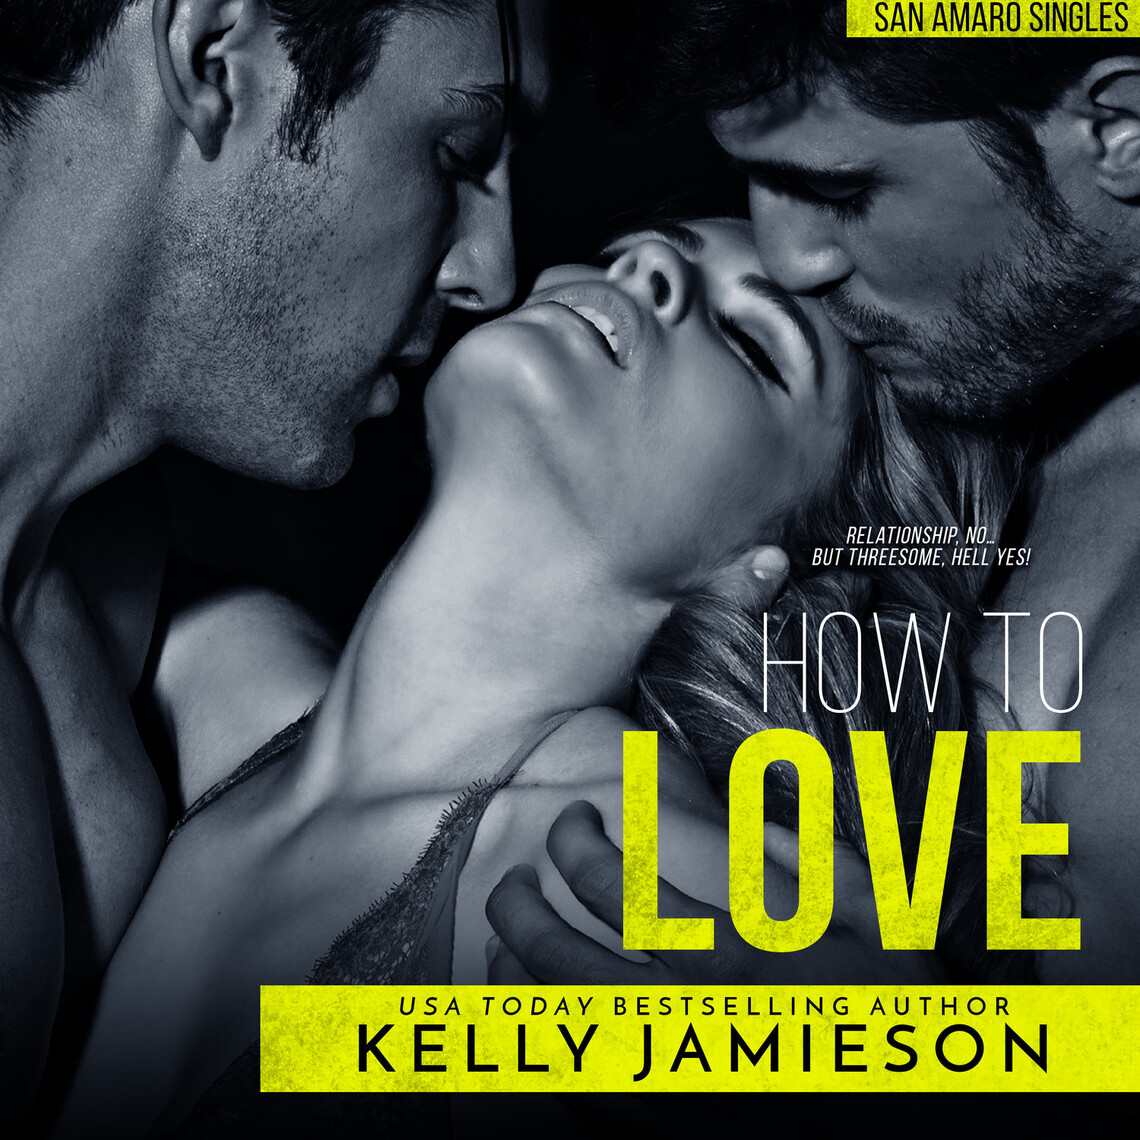 How to Love by Kelly Jamieson